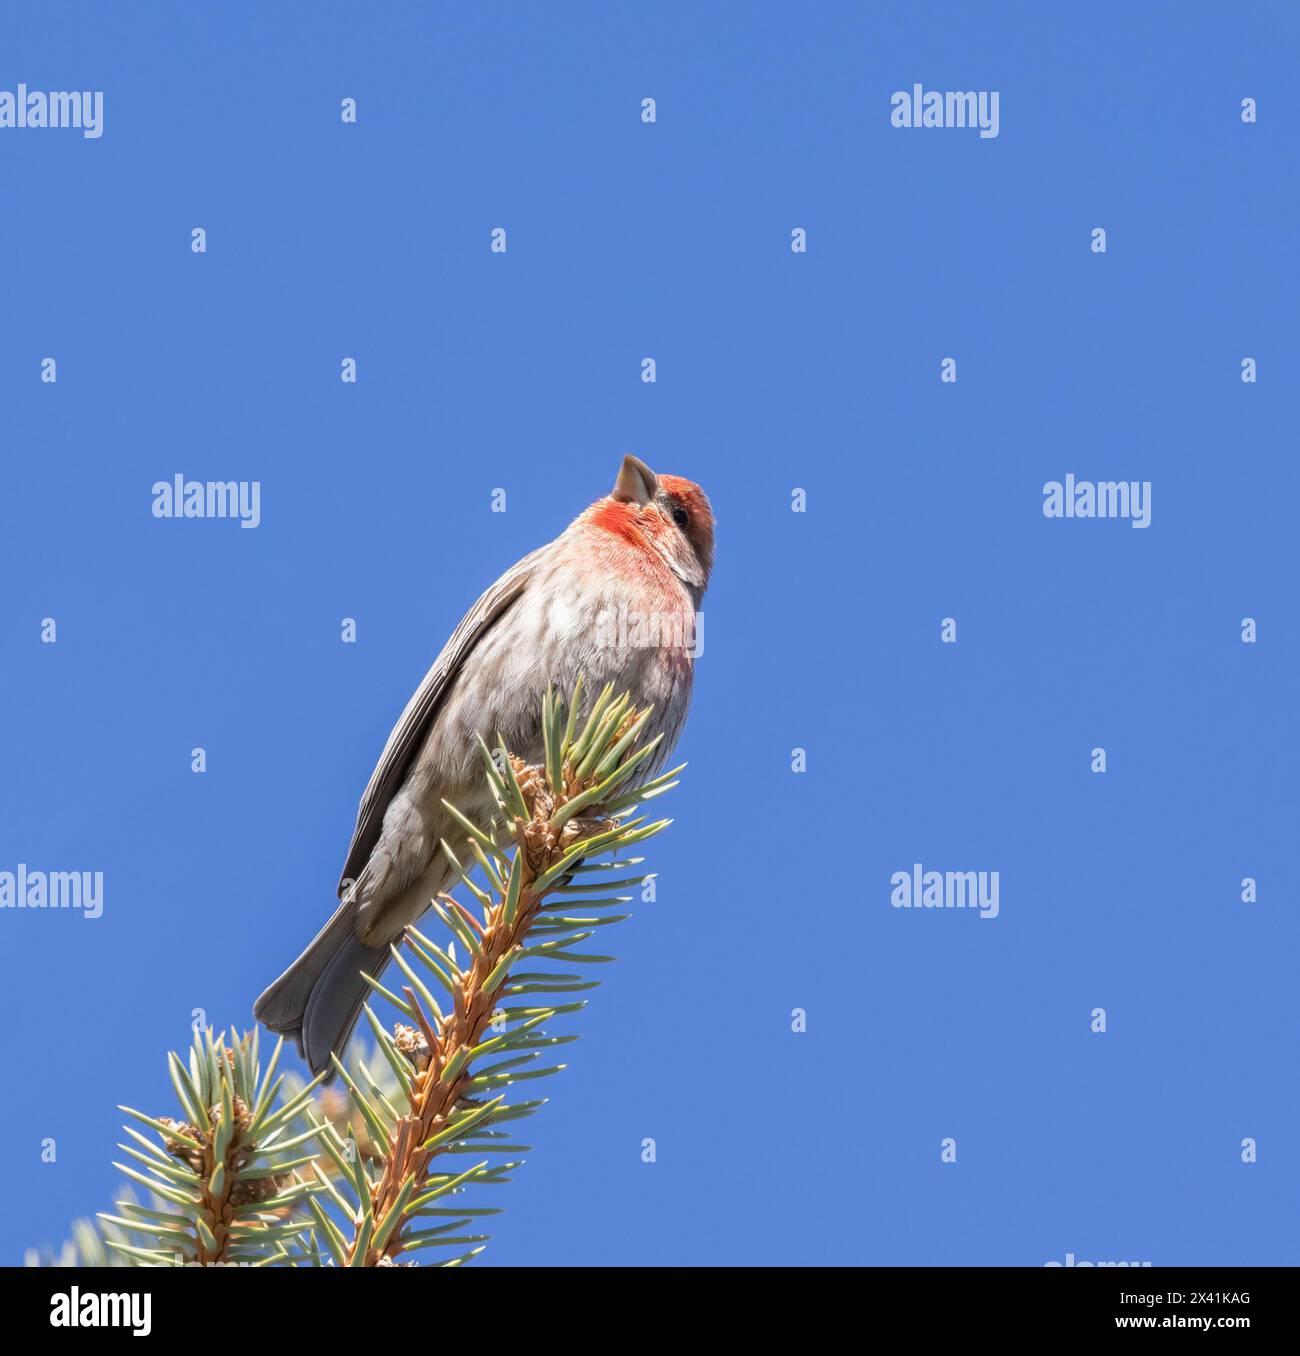 Male House finch atop a conifer tree Stock Photo